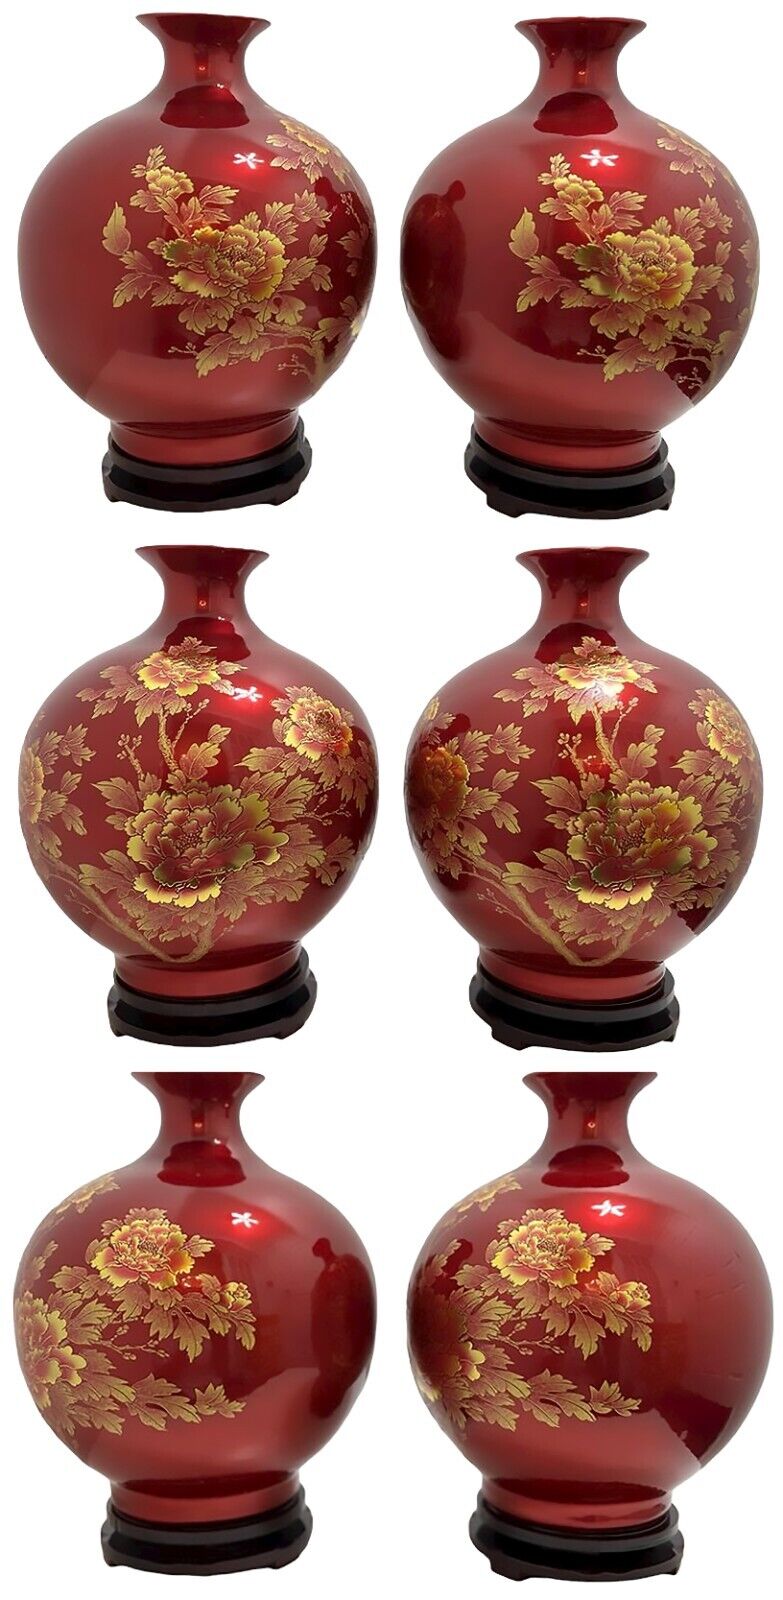 Porcelain Vase Twin Handmade Art Work Red Golden a Master Piece With Stands B